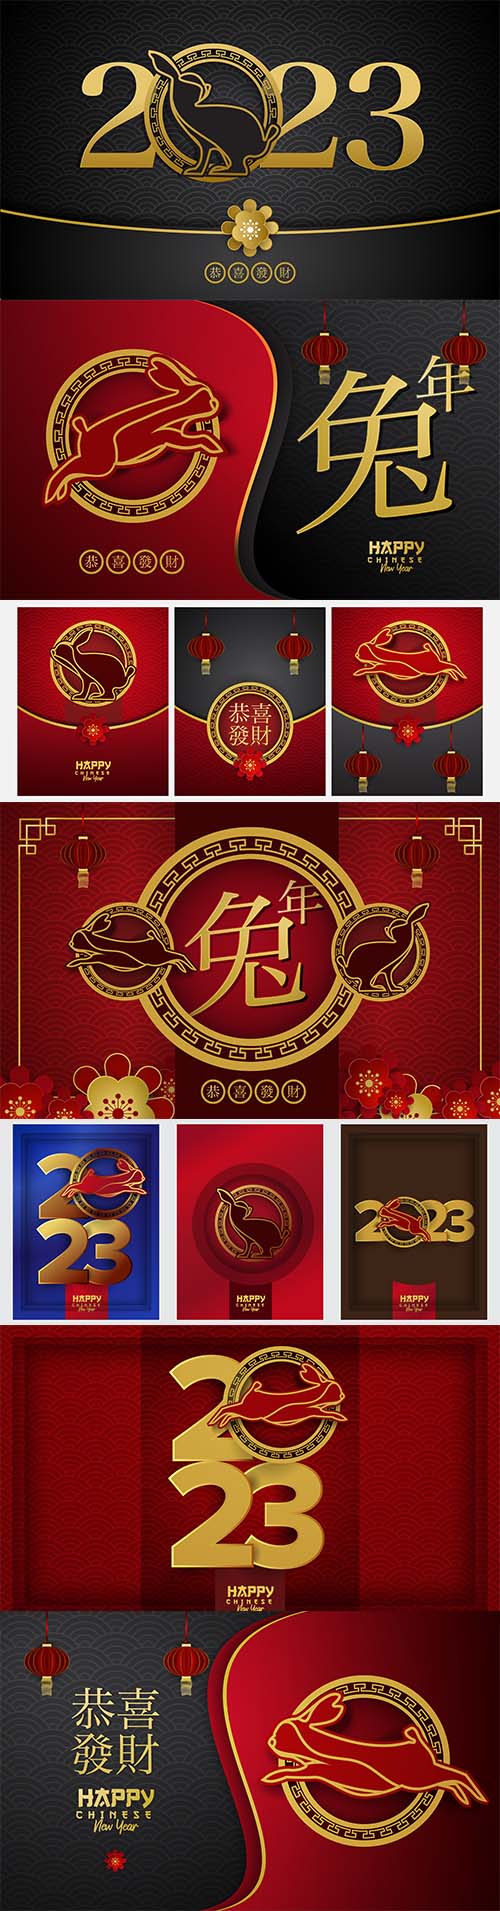 2023 happy chinese new year red gold rabbit bunny zodiac